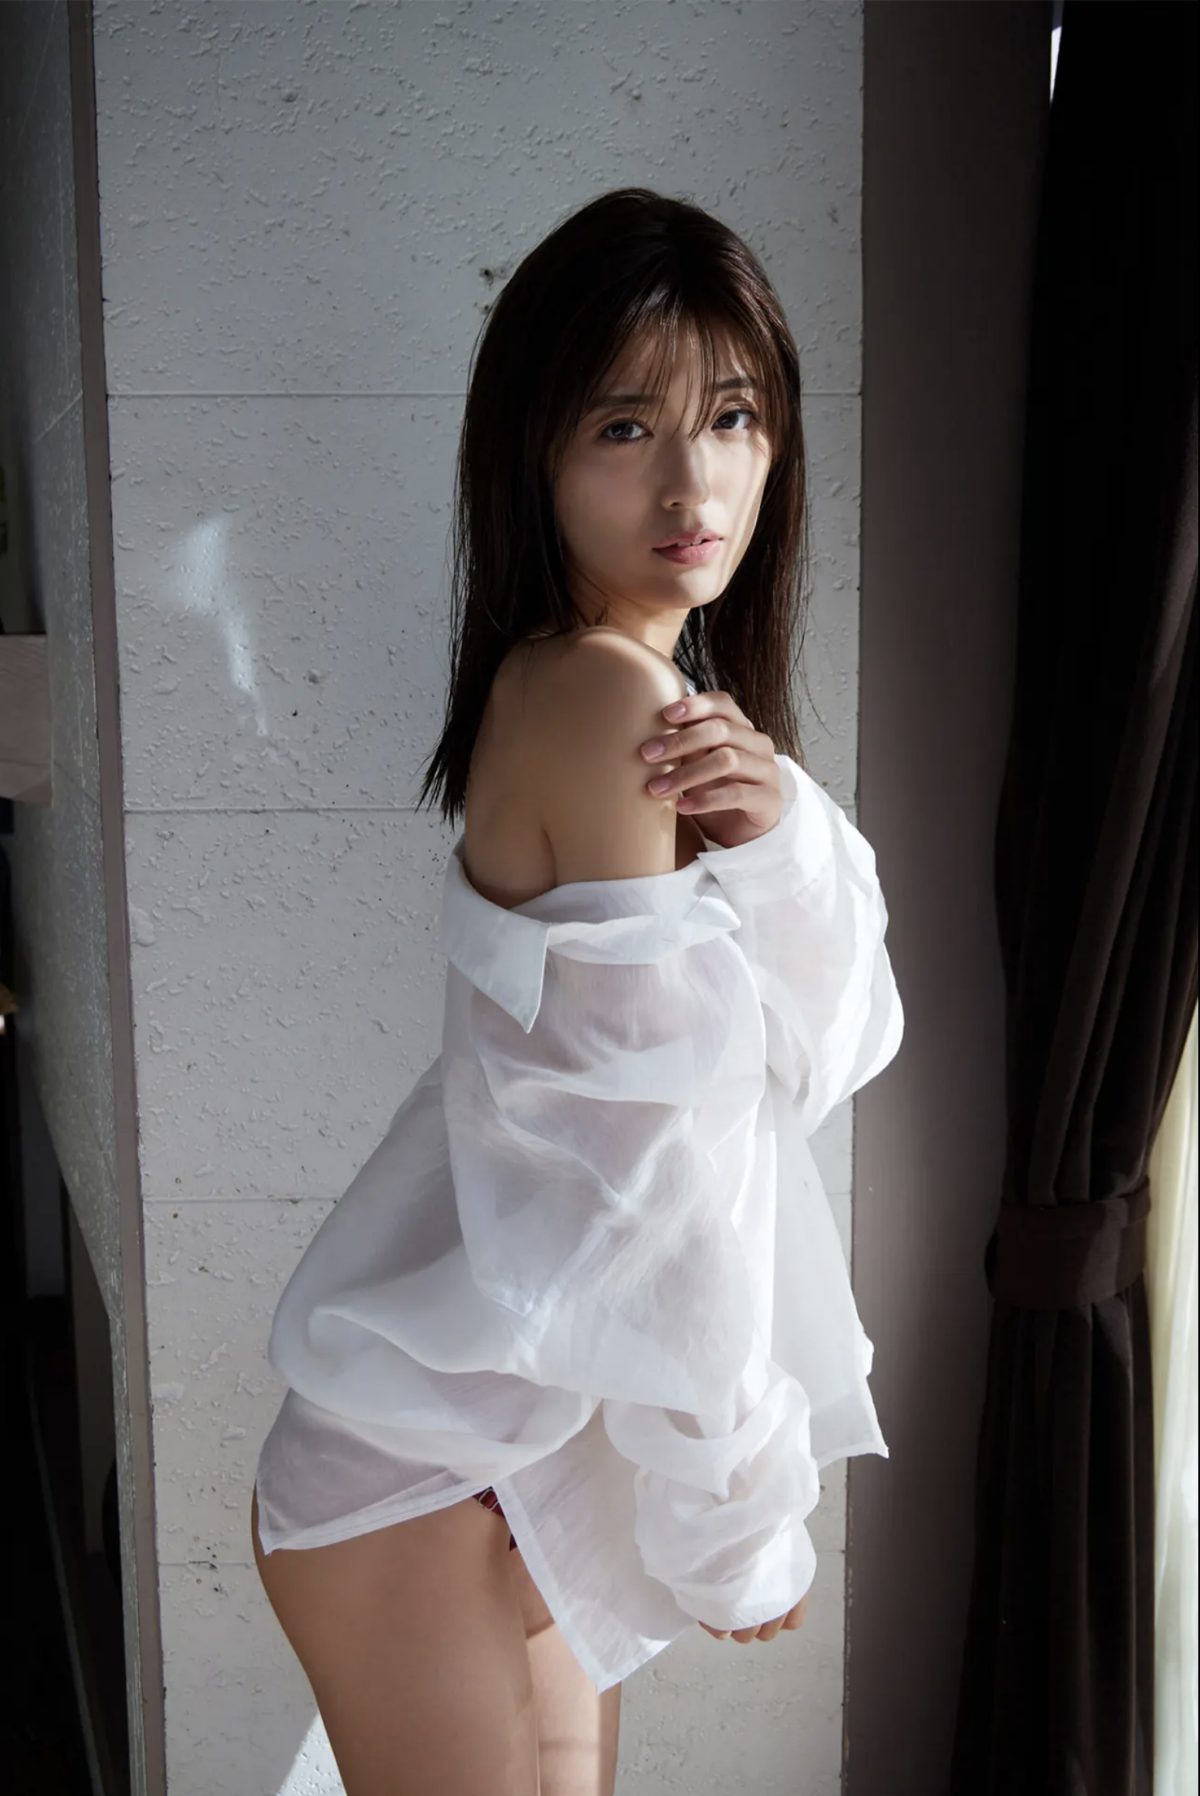 FRIDAY Digital Photobook 2021 03 10 Mio Kudo 工藤美桜 Adult SEXY that fascinates for the first time はじめて魅せる大人ＳＥＸＹ 064 9735779388.jpg